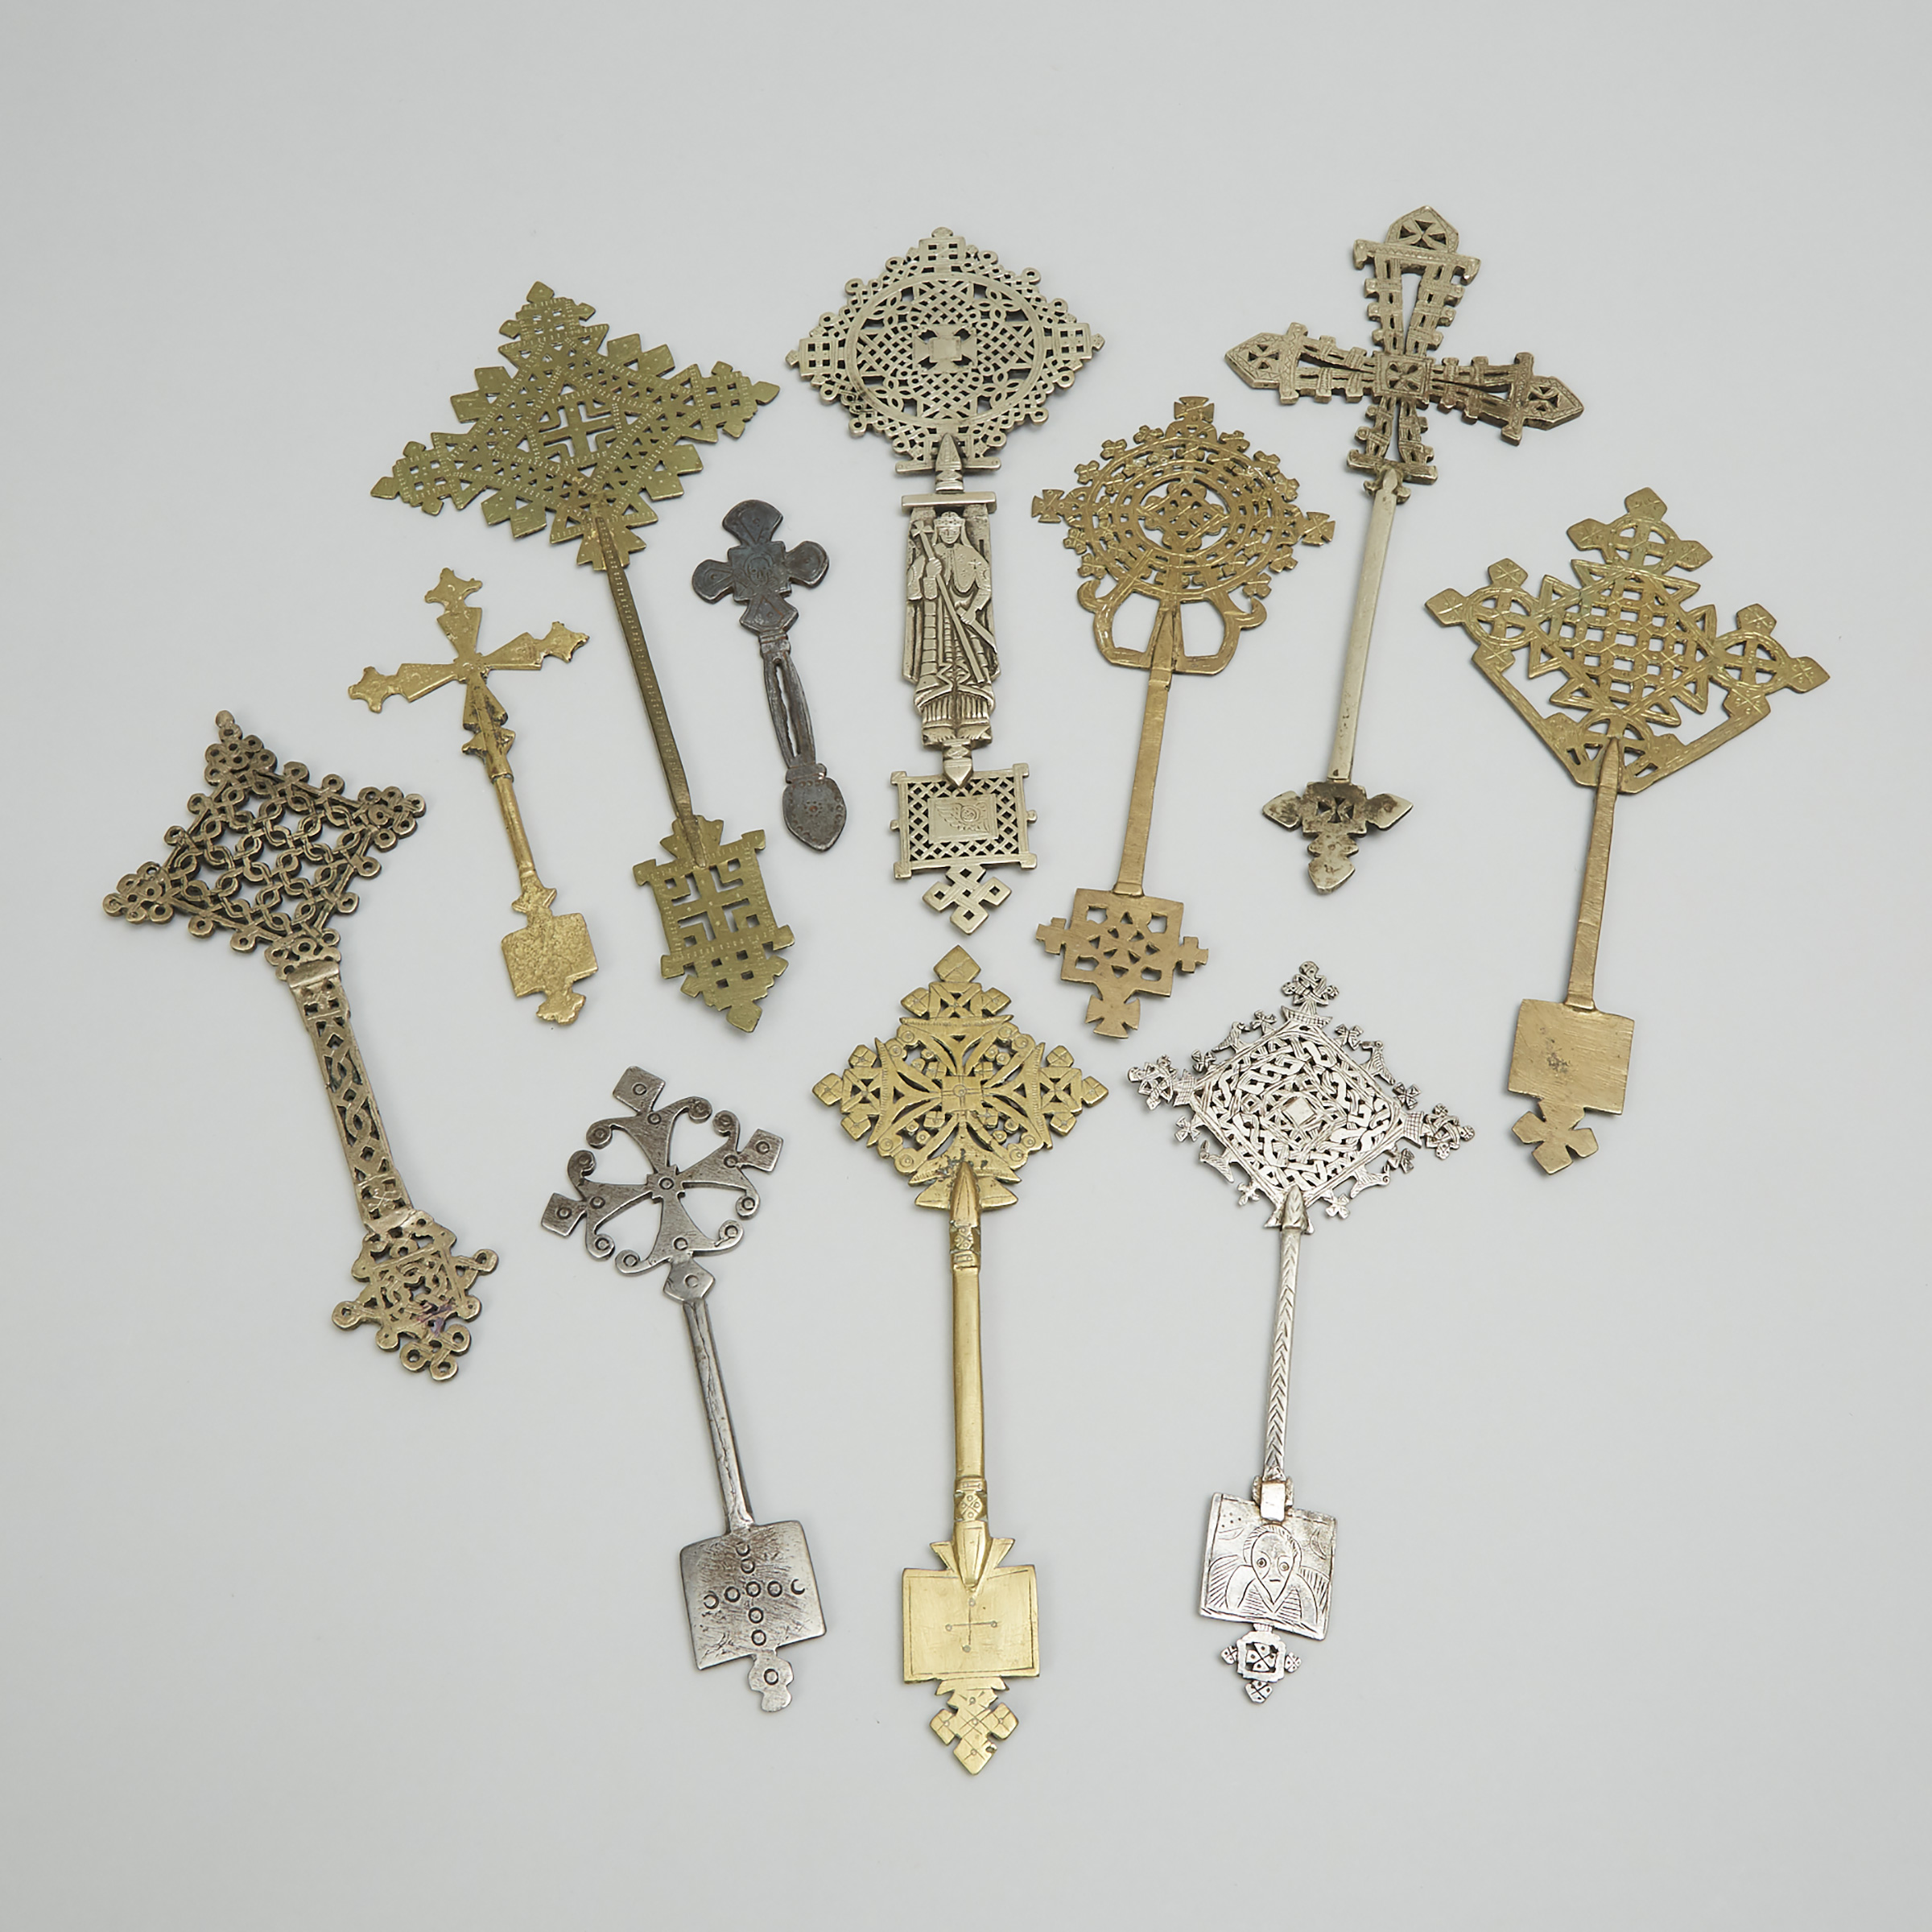 Eleven Abyssinian/Ethiopian Brass and Silvered Brass Coptic Hand Crosses, early-mid 20th century